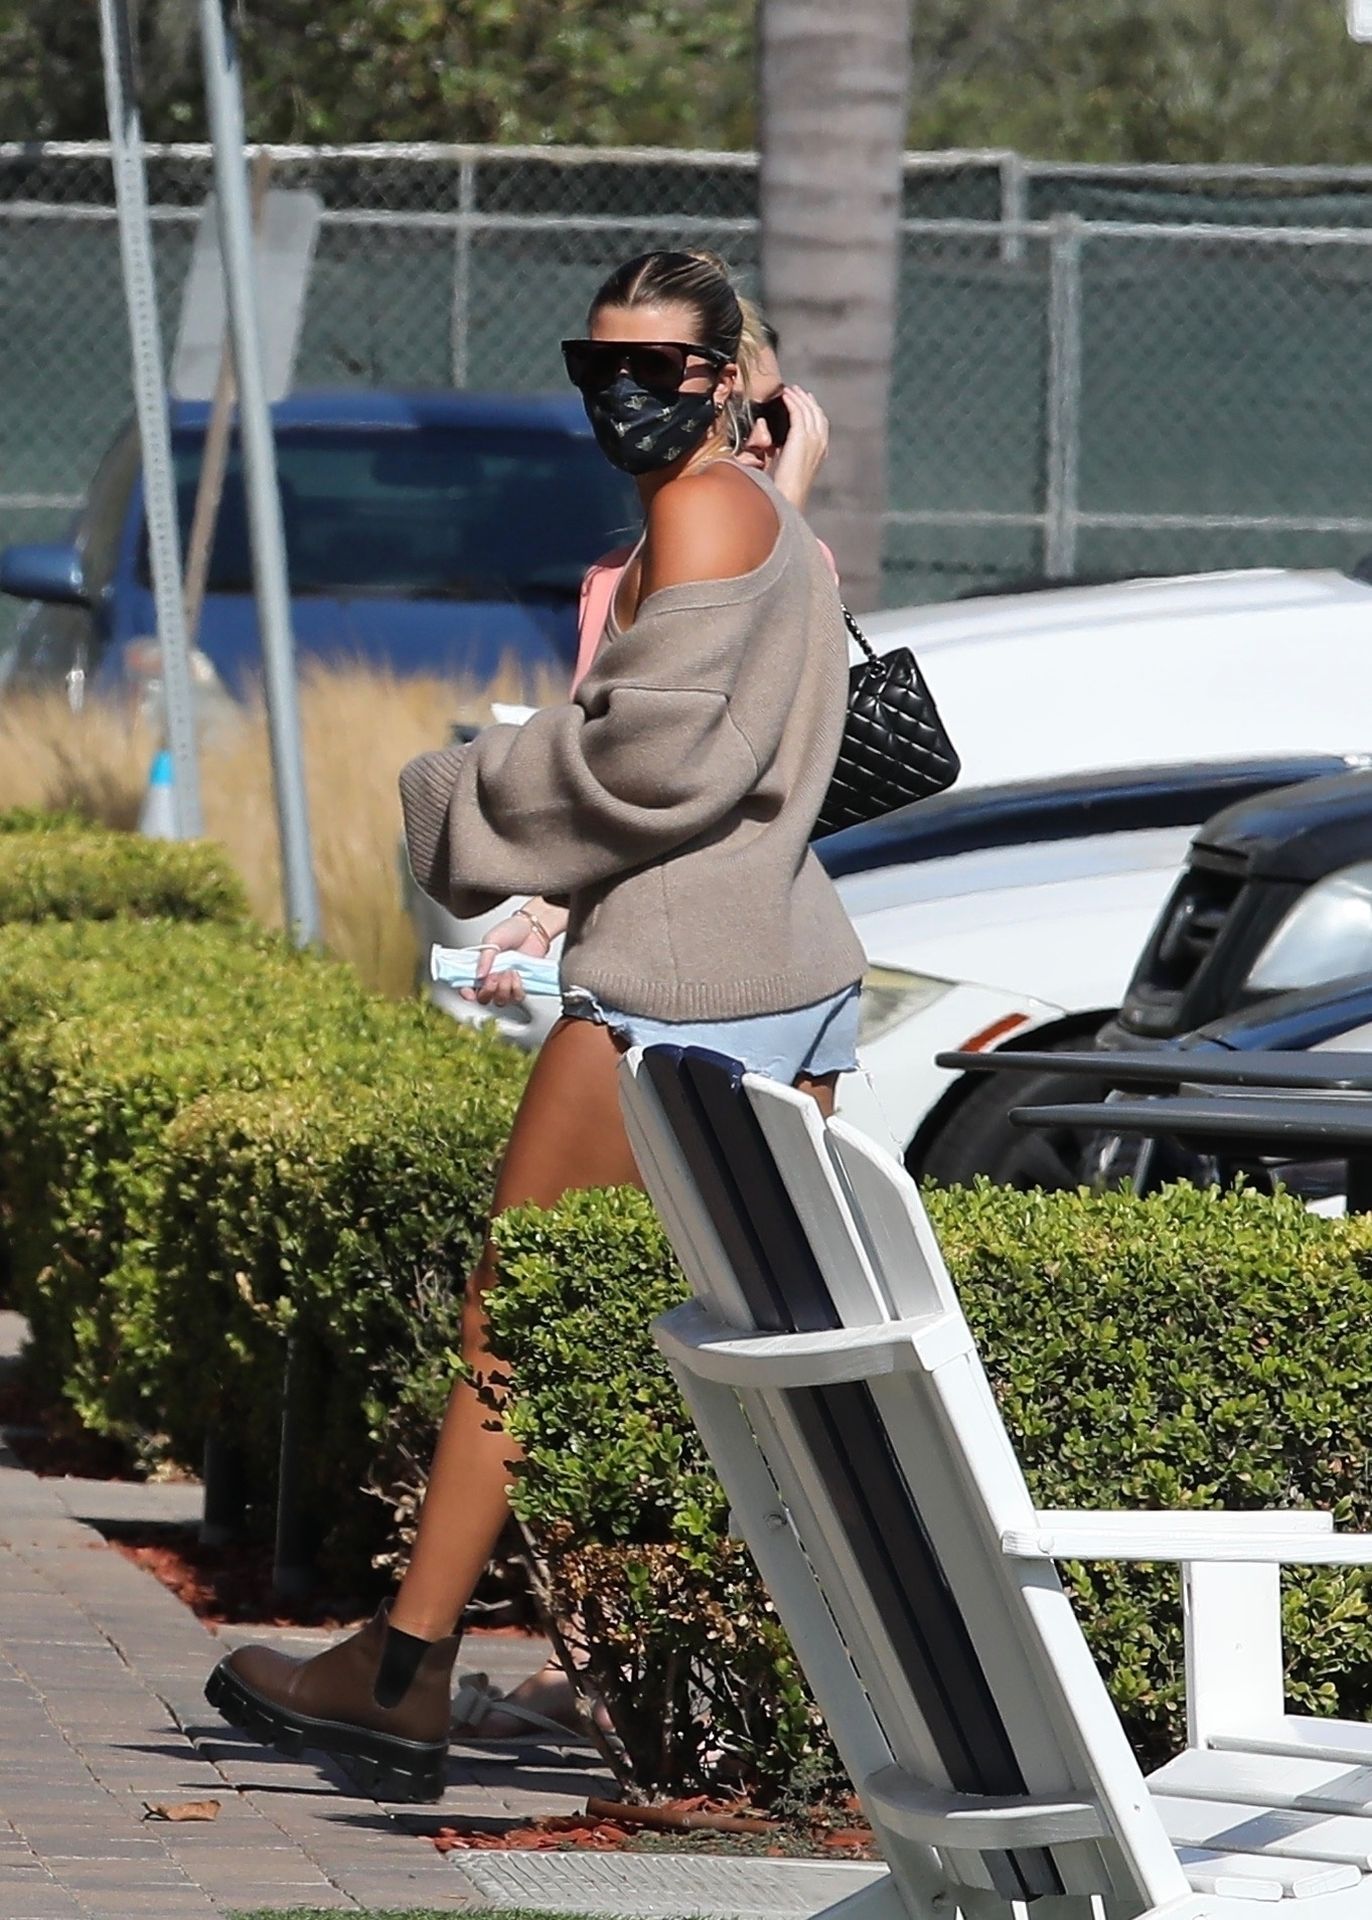 Leggy Sofia Richie Shops with Friends at the Malibu Country Mart (Photos)